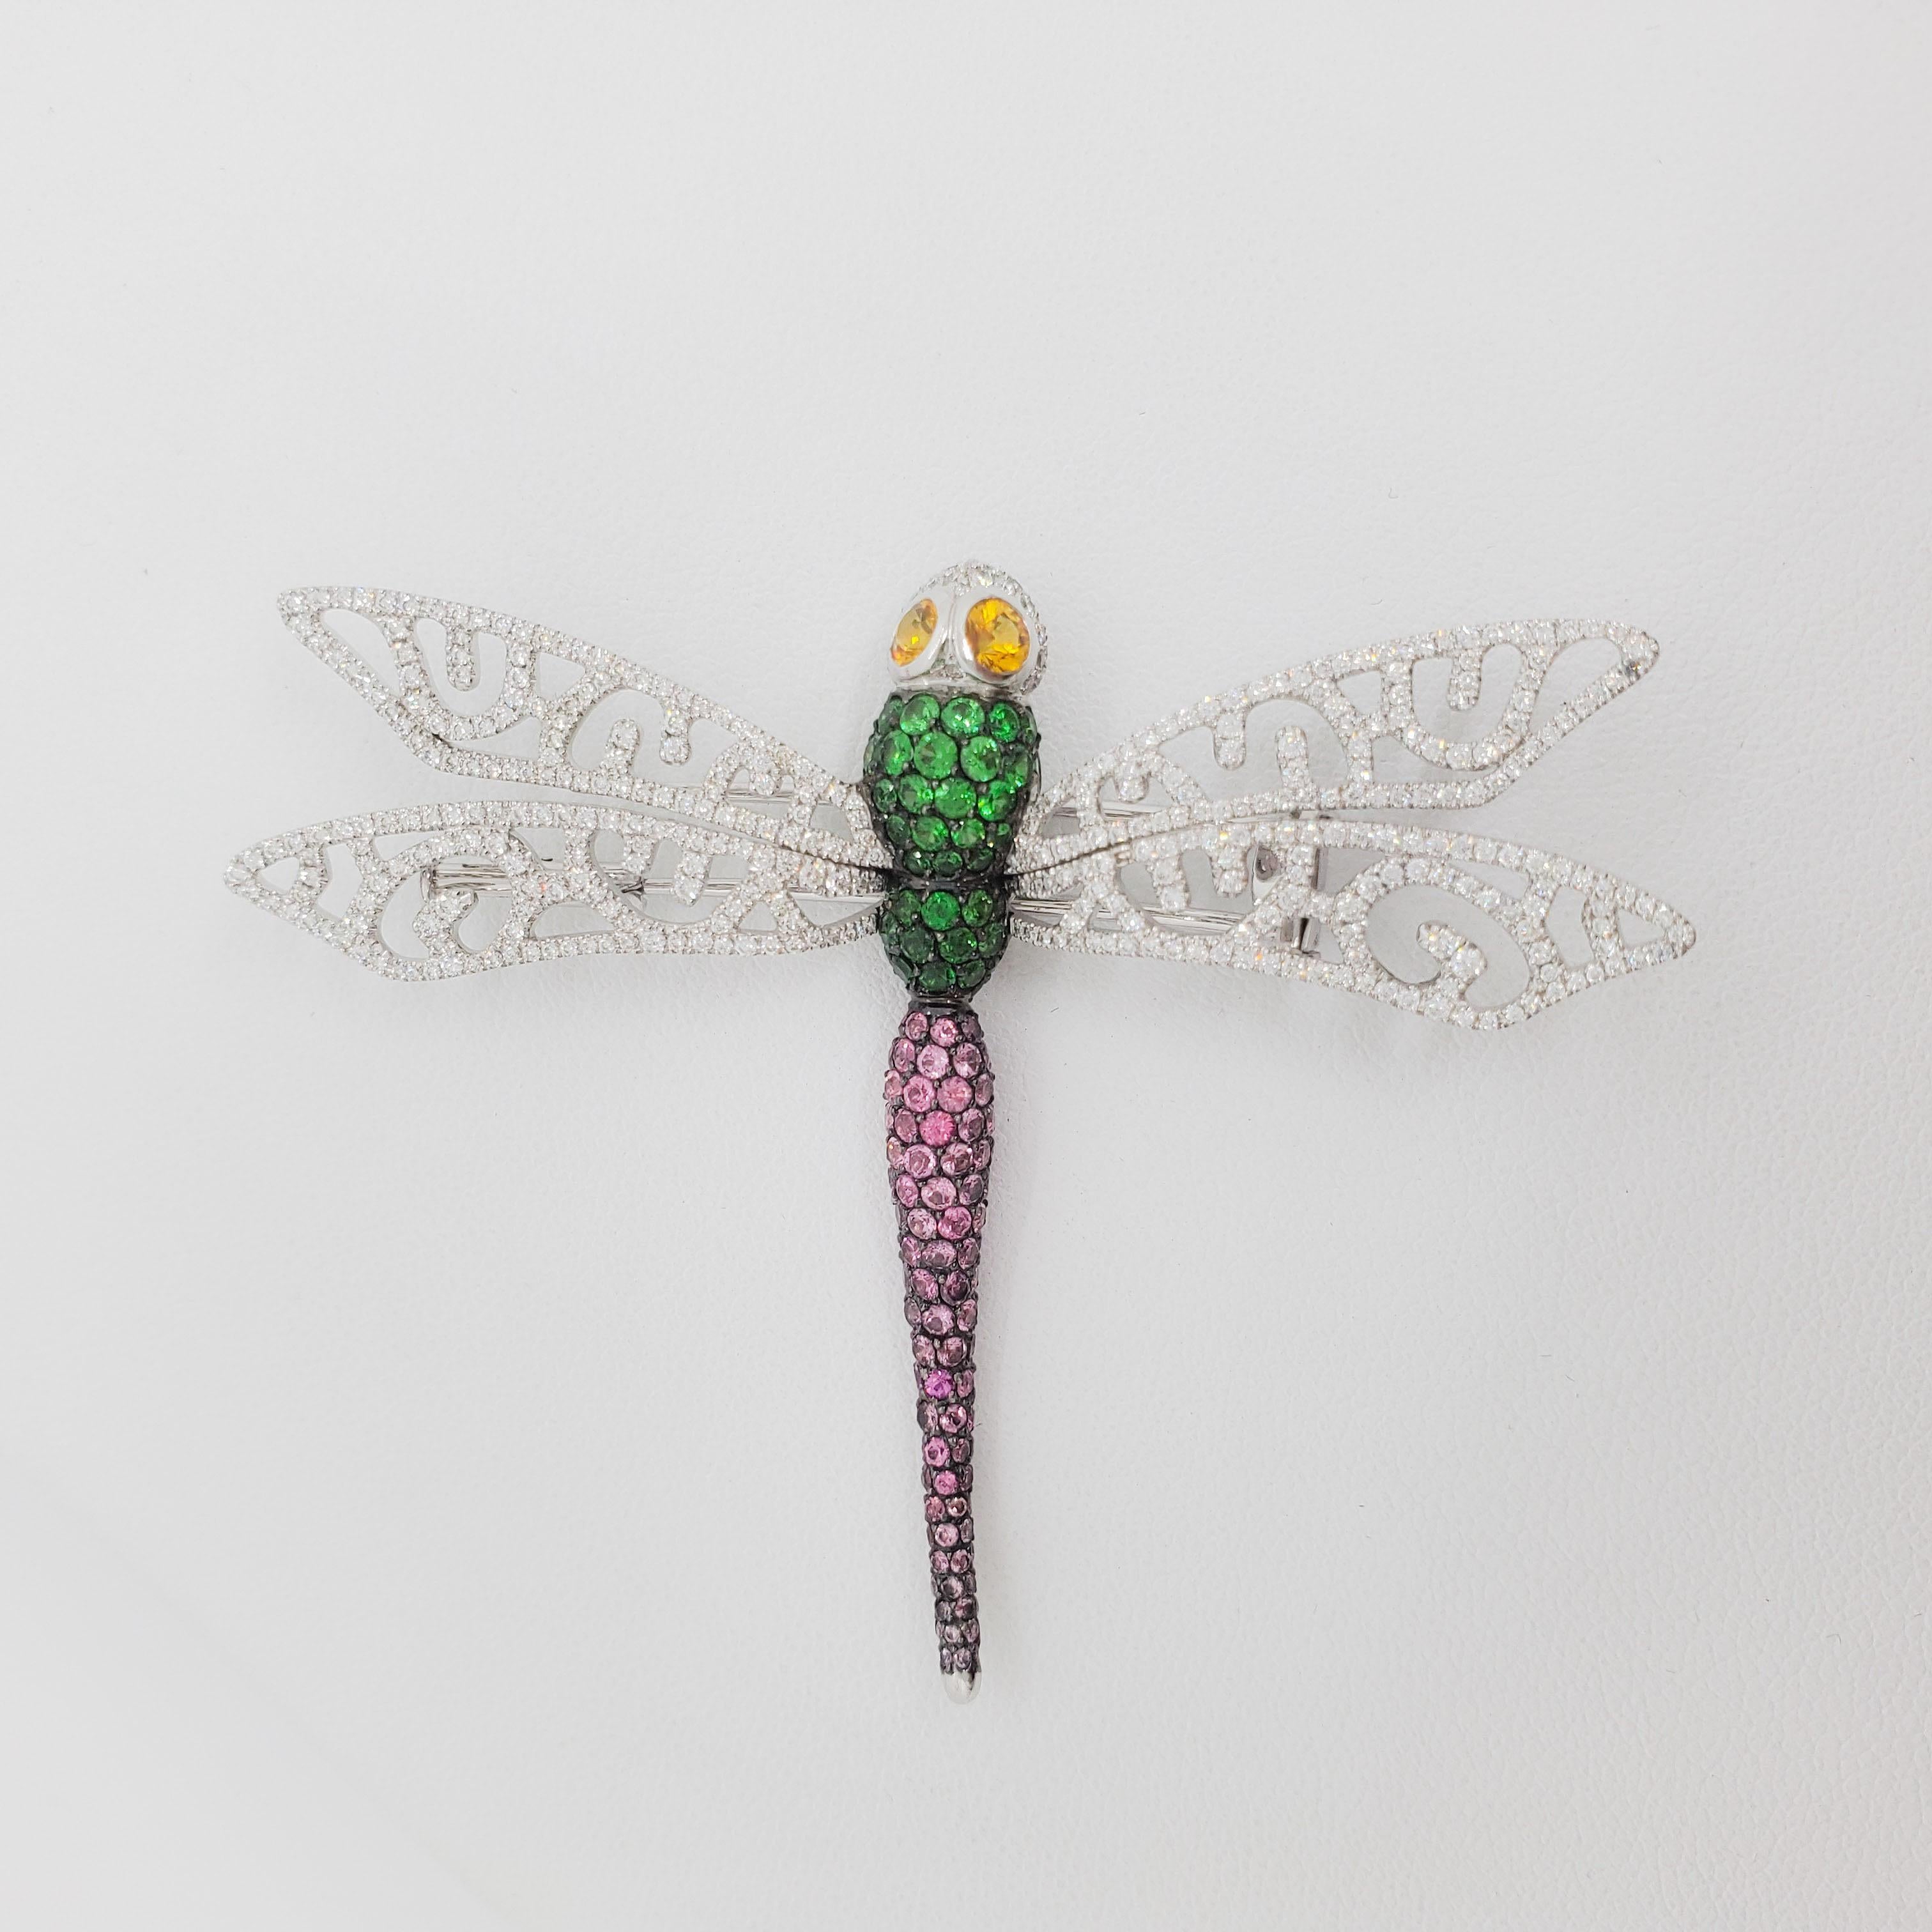 Beautiful dragonfly brooch with 1.29 ct. of good quality white diamonds, green and pink gemstones.  Handmade with careful thought and intricacy in 18k white gold.  